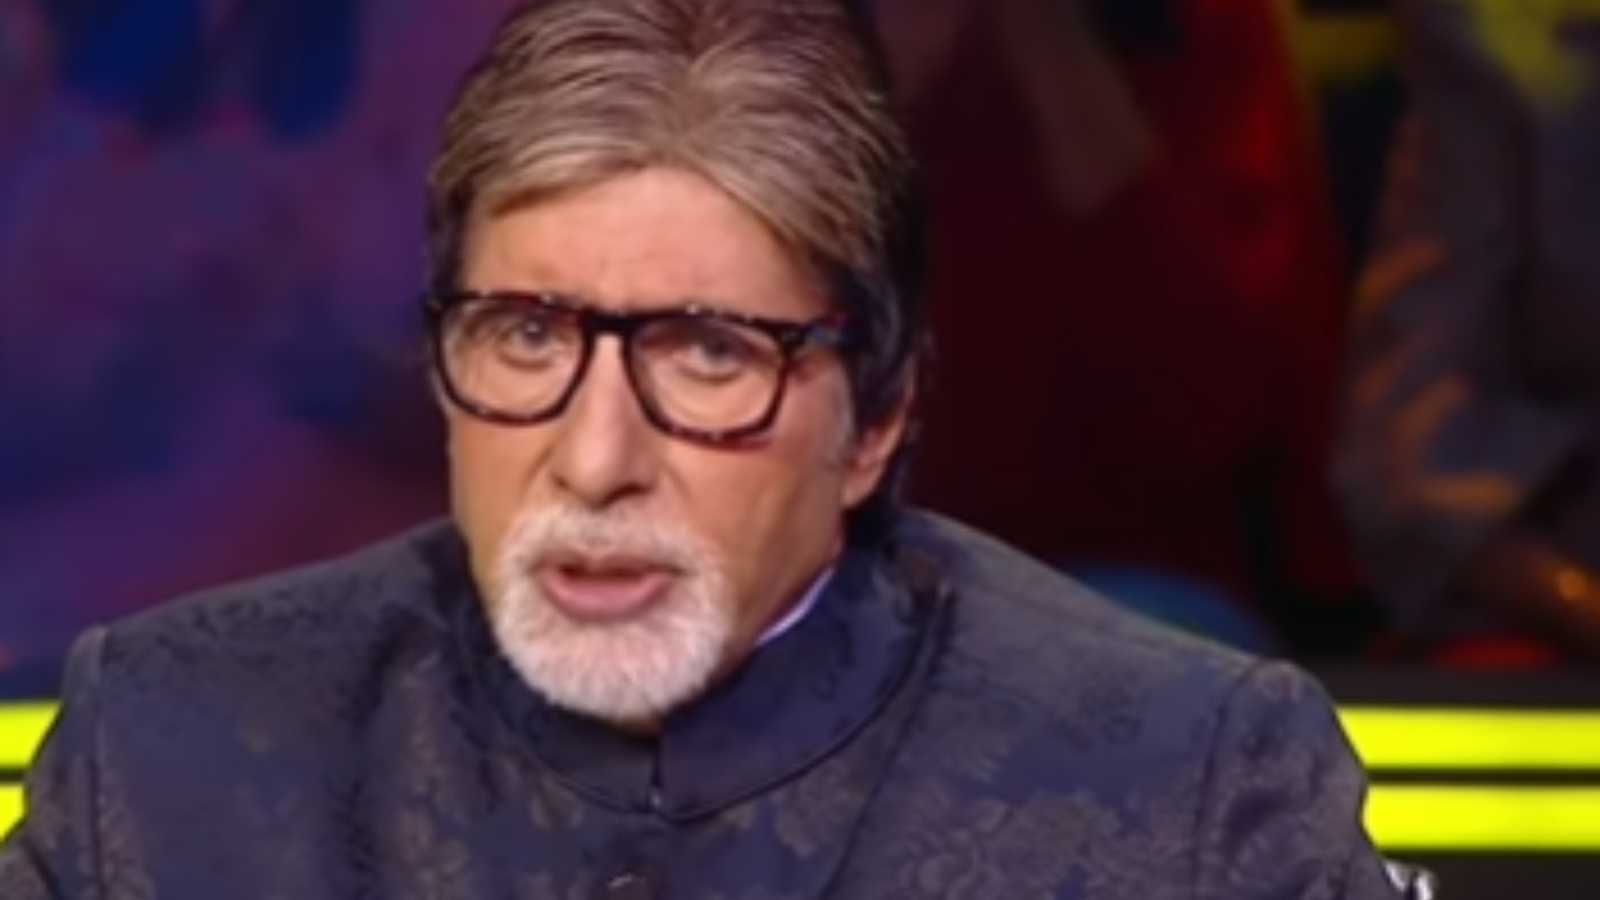 Amitabh Bachchan tests positive for COVID-19 for second time, shares update on his health